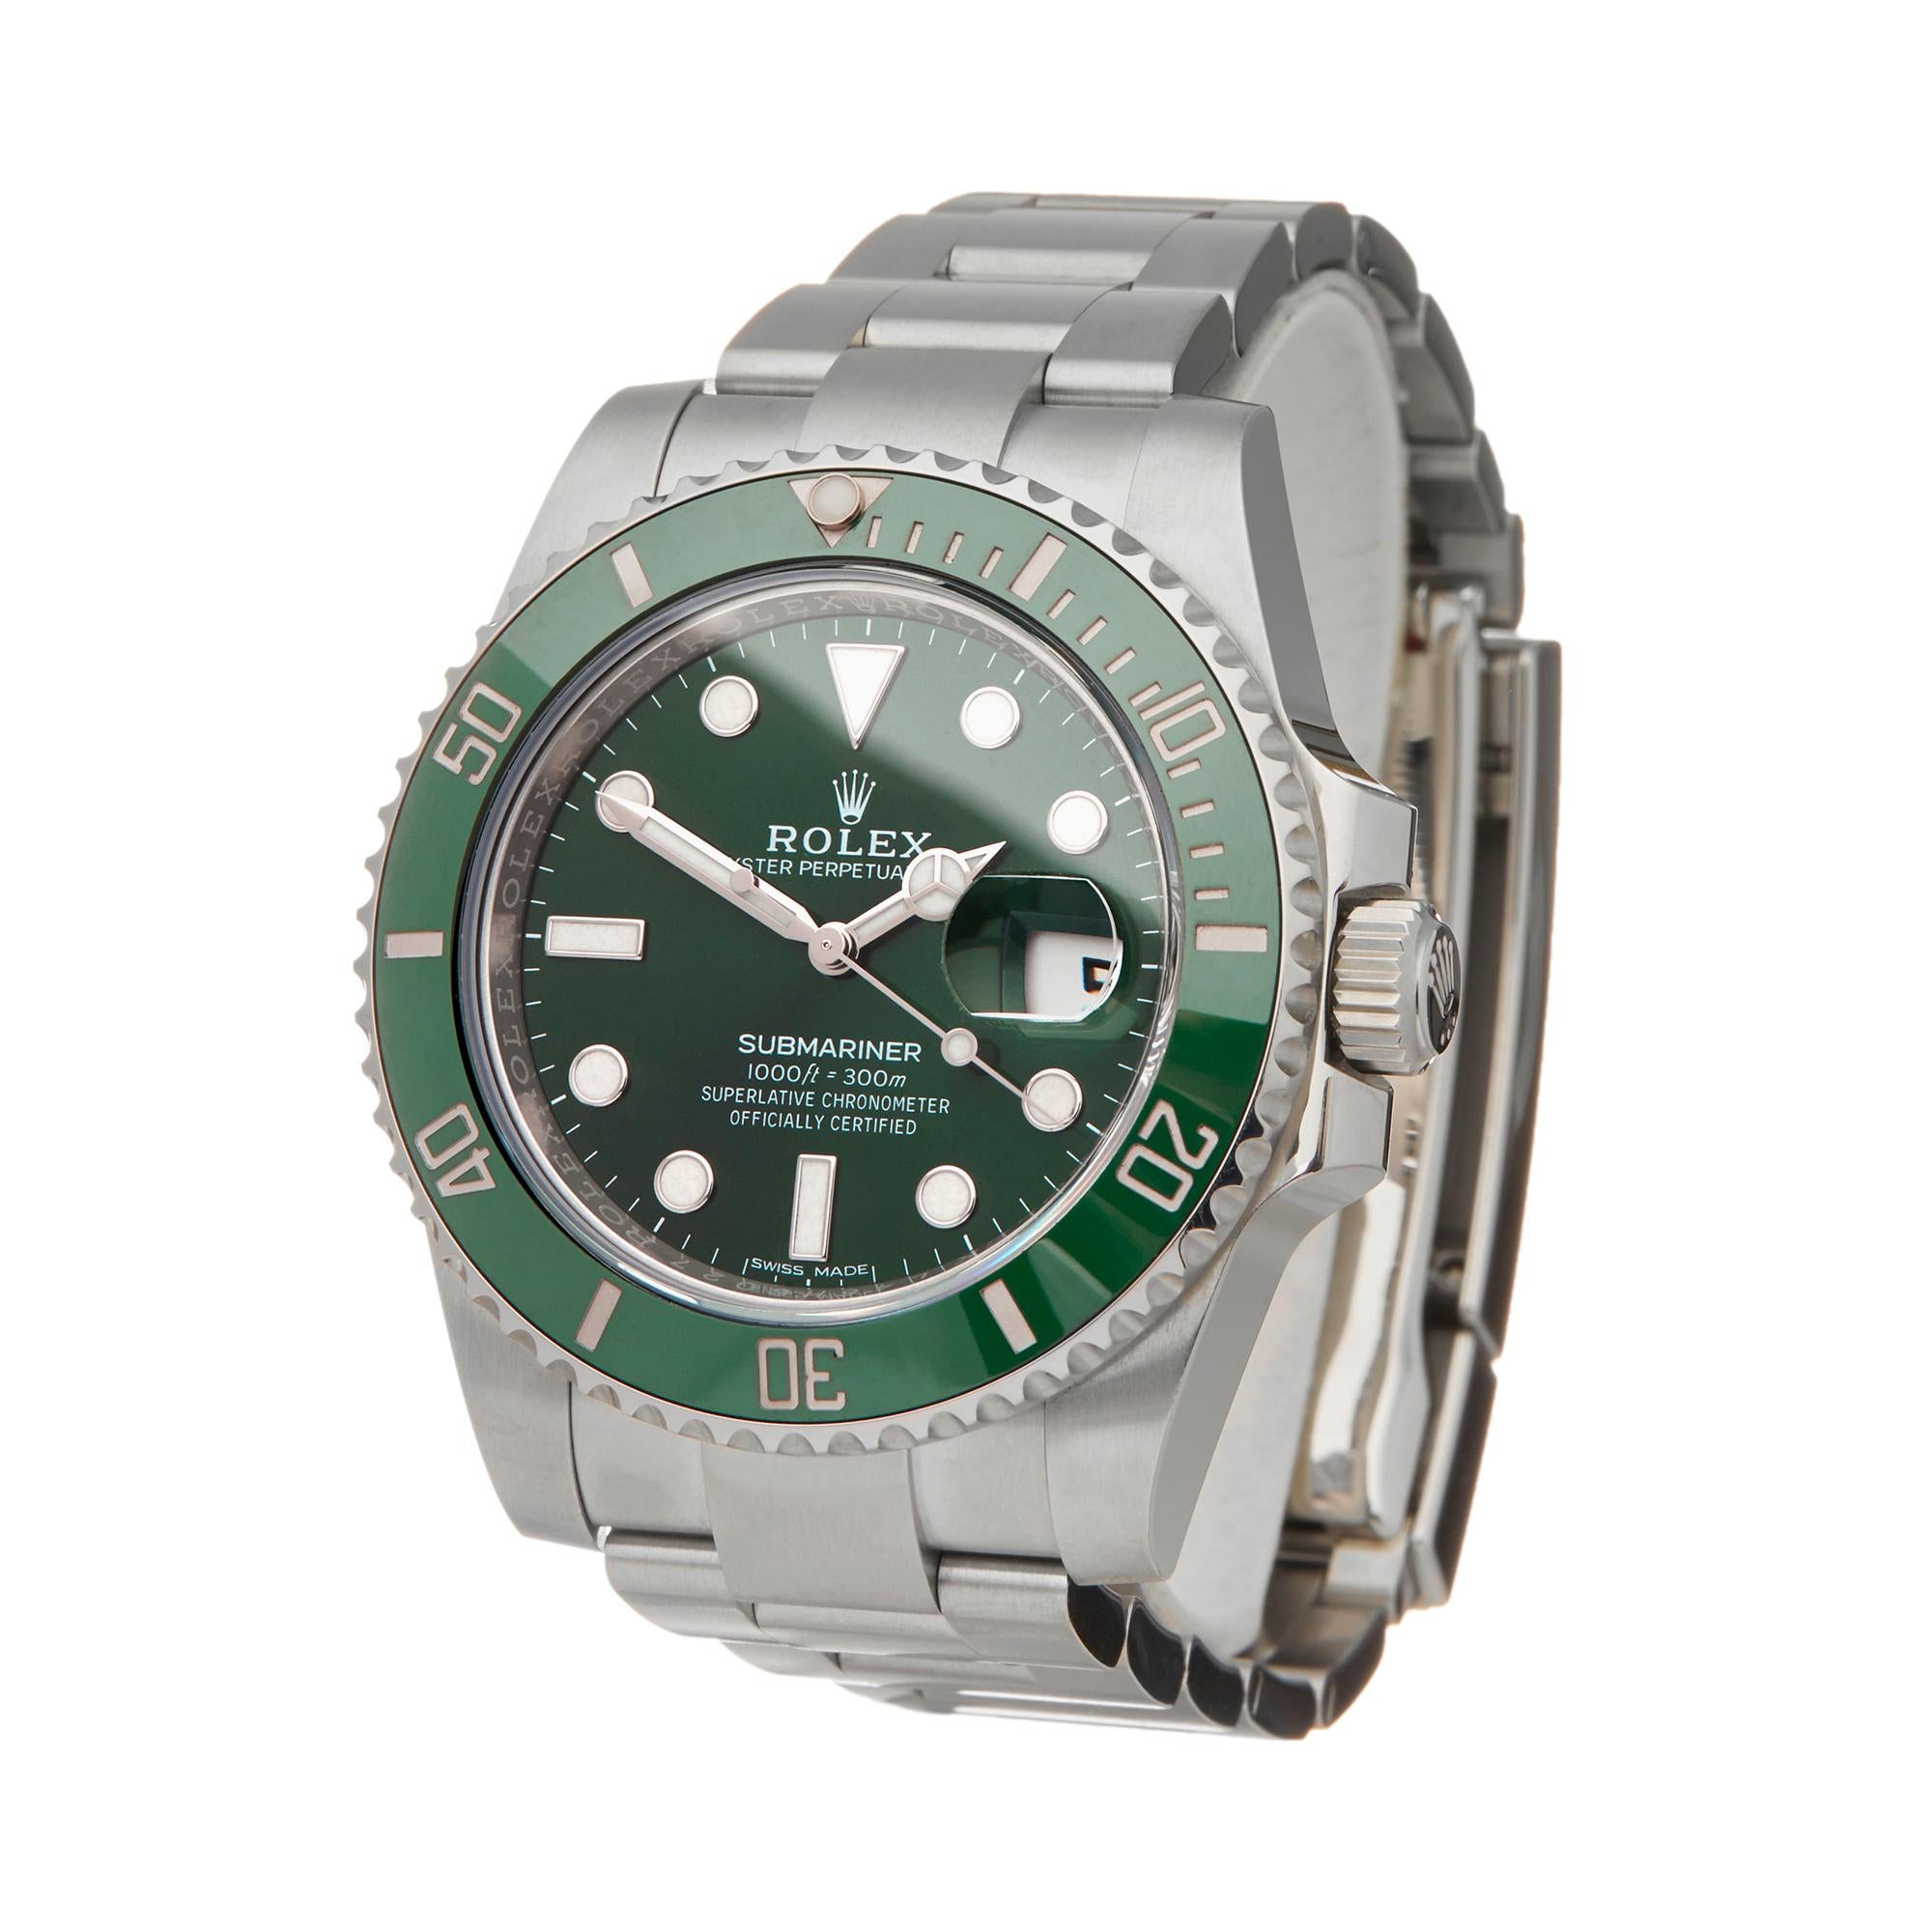 Reference: W6076
Manufacturer: Rolex
Model: Submariner
Model Reference: 116610LV
Age: 14th May 2018
Gender: Men's
Box and Papers: Box, Manuals and Guarantee
Dial: Black
Glass: Sapphire Crystal
Movement: Automatic
Water Resistance: To Manufacturers